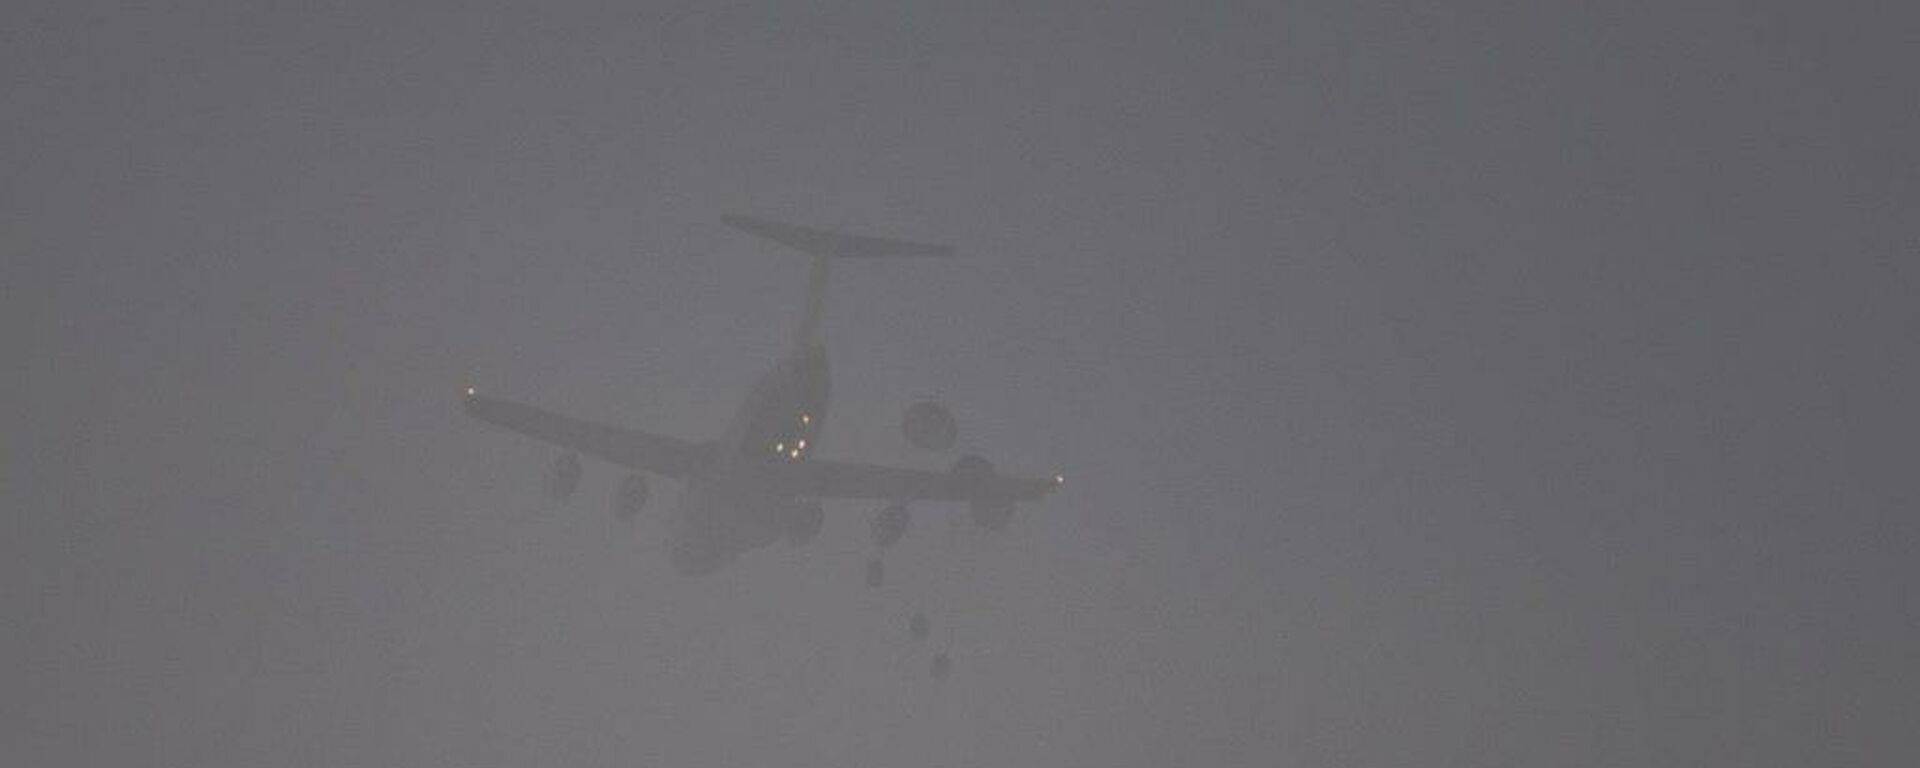 Three parachutes open as the parcels are dropped from the C-17.